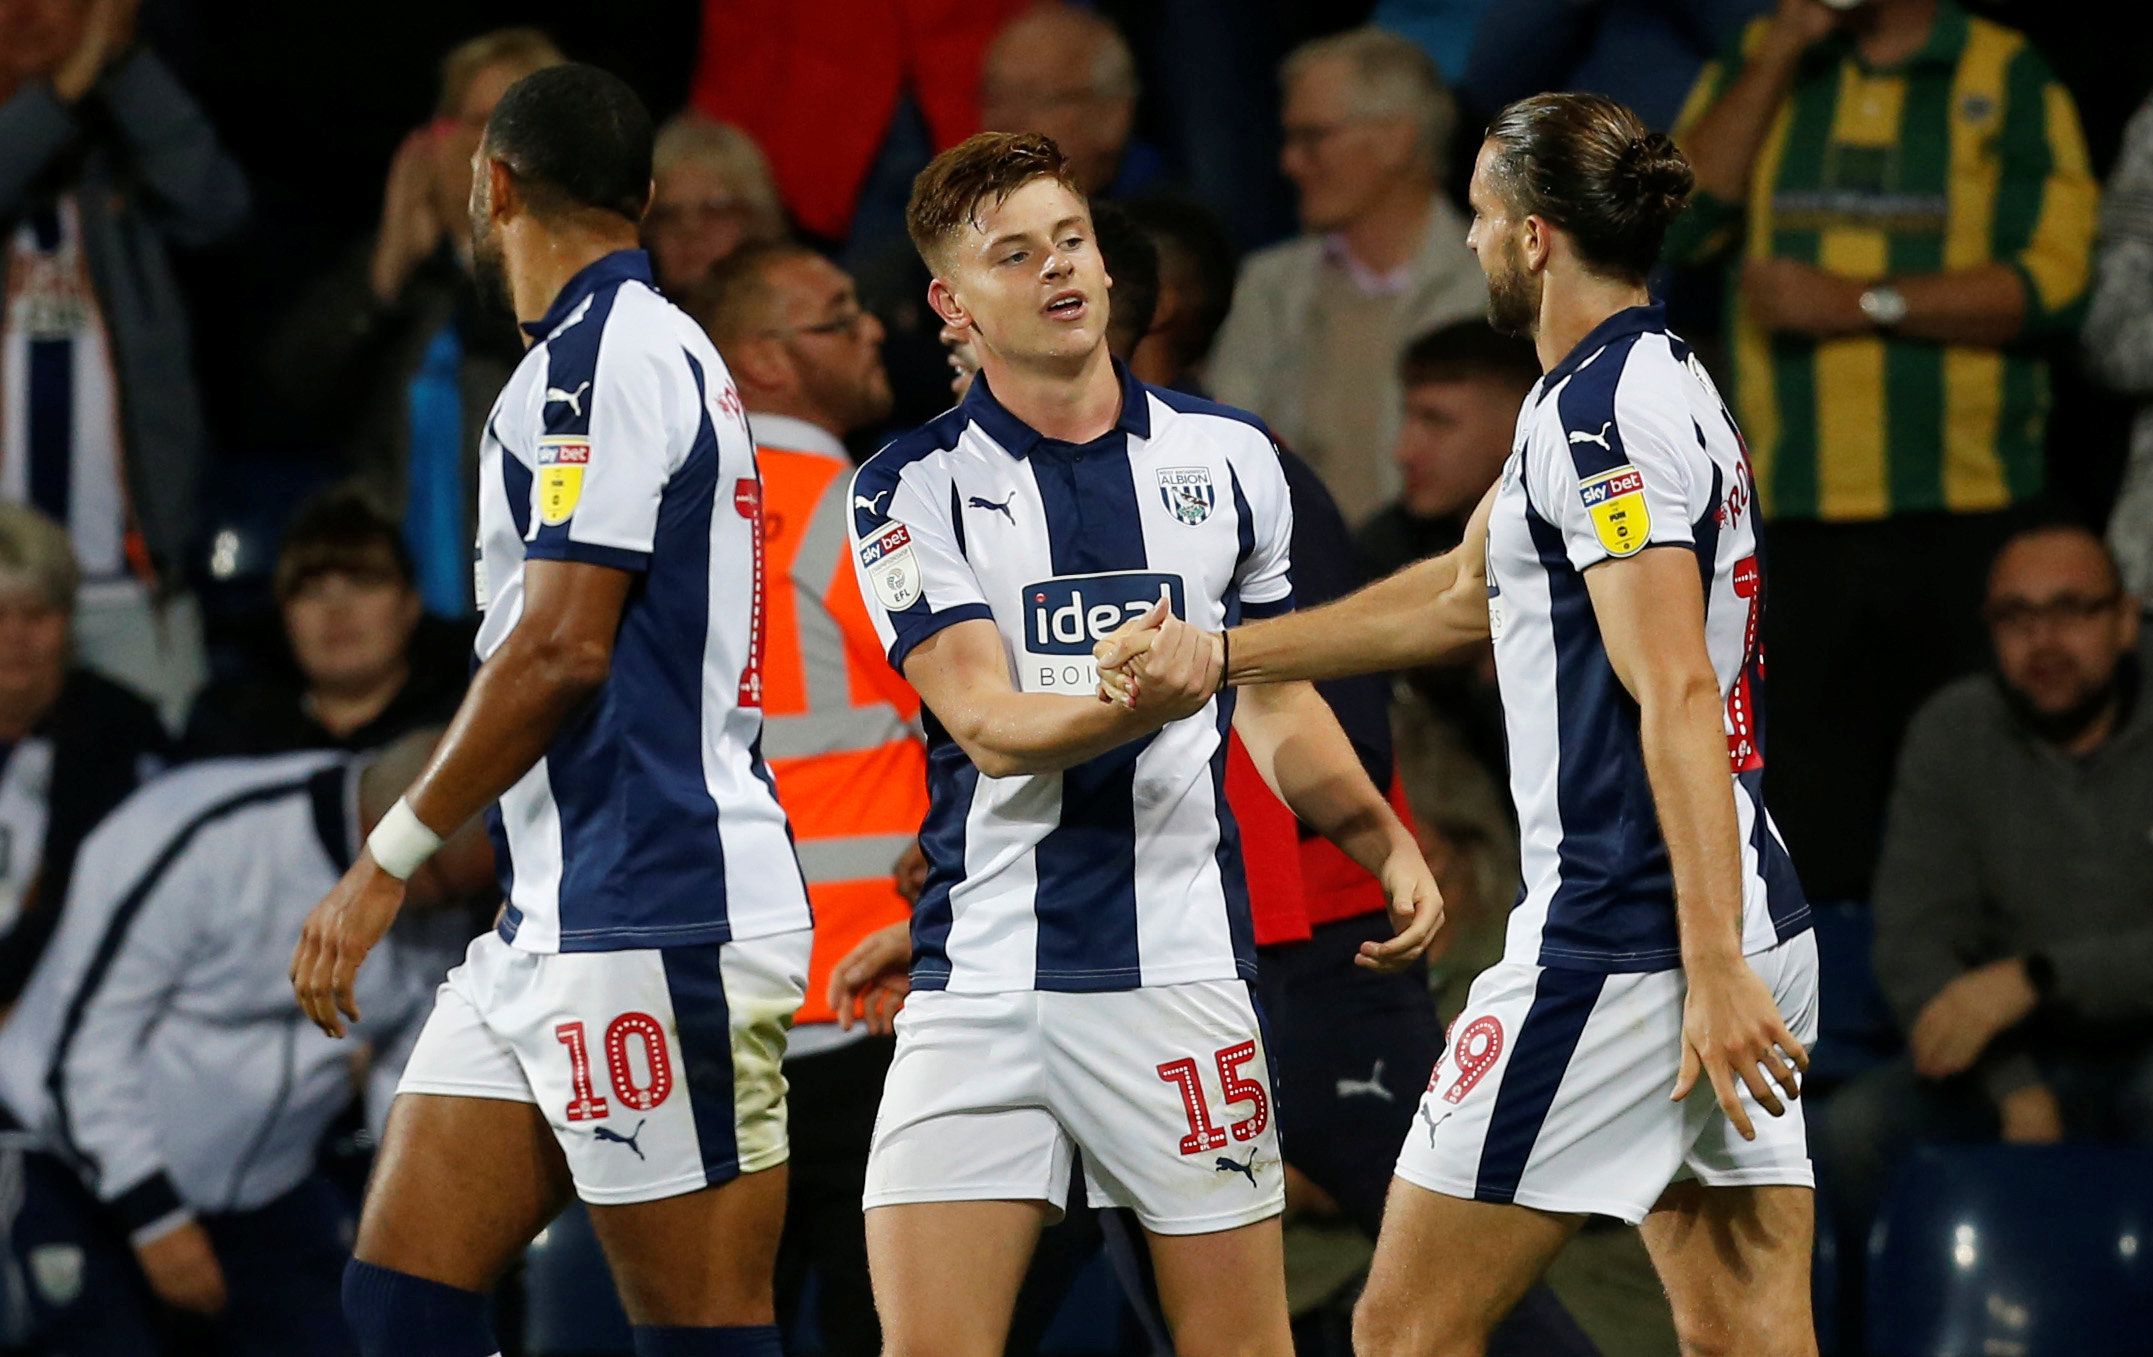 Soccer Football - Championship - West Bromwich Albion v Bristol City - The Hawthorns, West Bromwich, Britain - September 18, 2018  West Bromwich Albion's Harvey Barnes celebrates with Jay Rodriguez after scoring their fourth goal  Action Images/Ed Sykes  EDITORIAL USE ONLY. No use with unauthorized audio, video, data, fixture lists, club/league logos or 